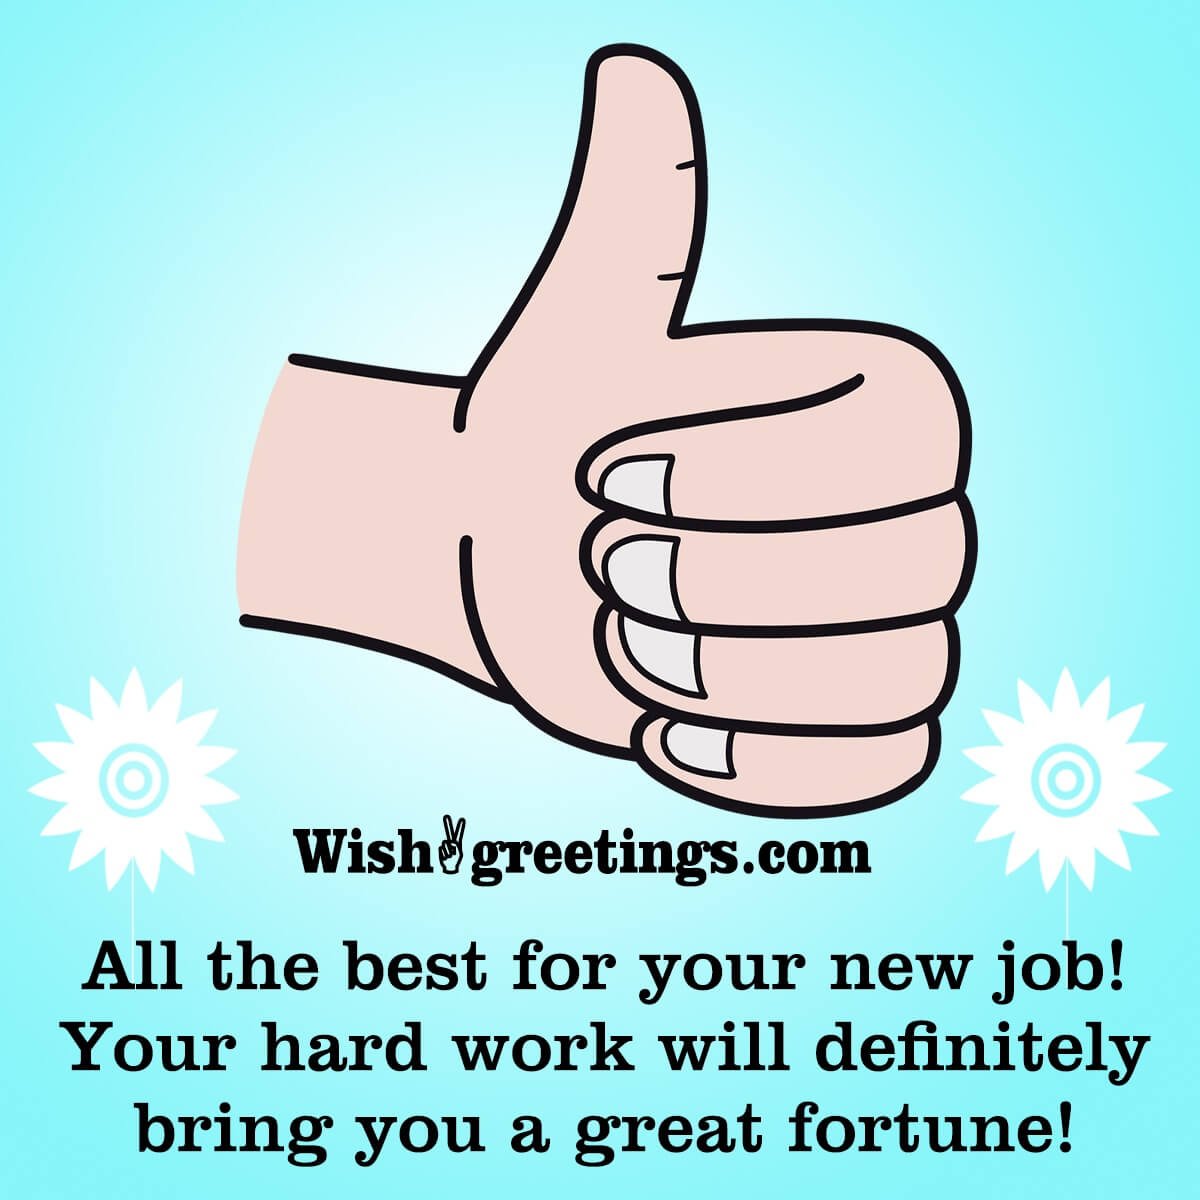 Wishing you all the best for your new job